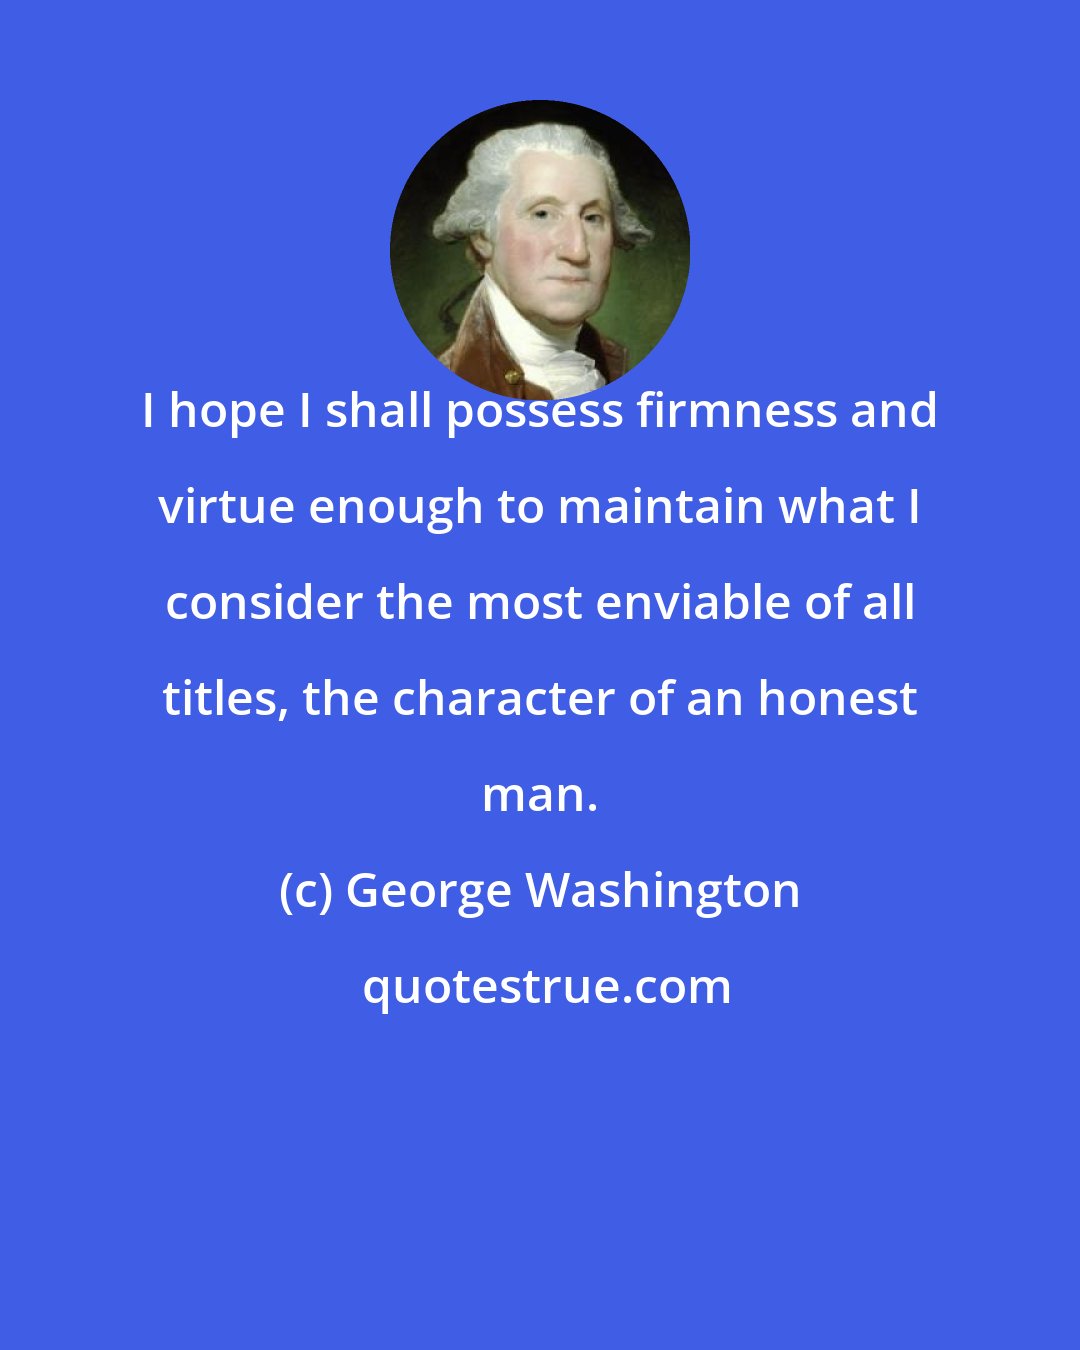 George Washington: I hope I shall possess firmness and virtue enough to maintain what I consider the most enviable of all titles, the character of an honest man.